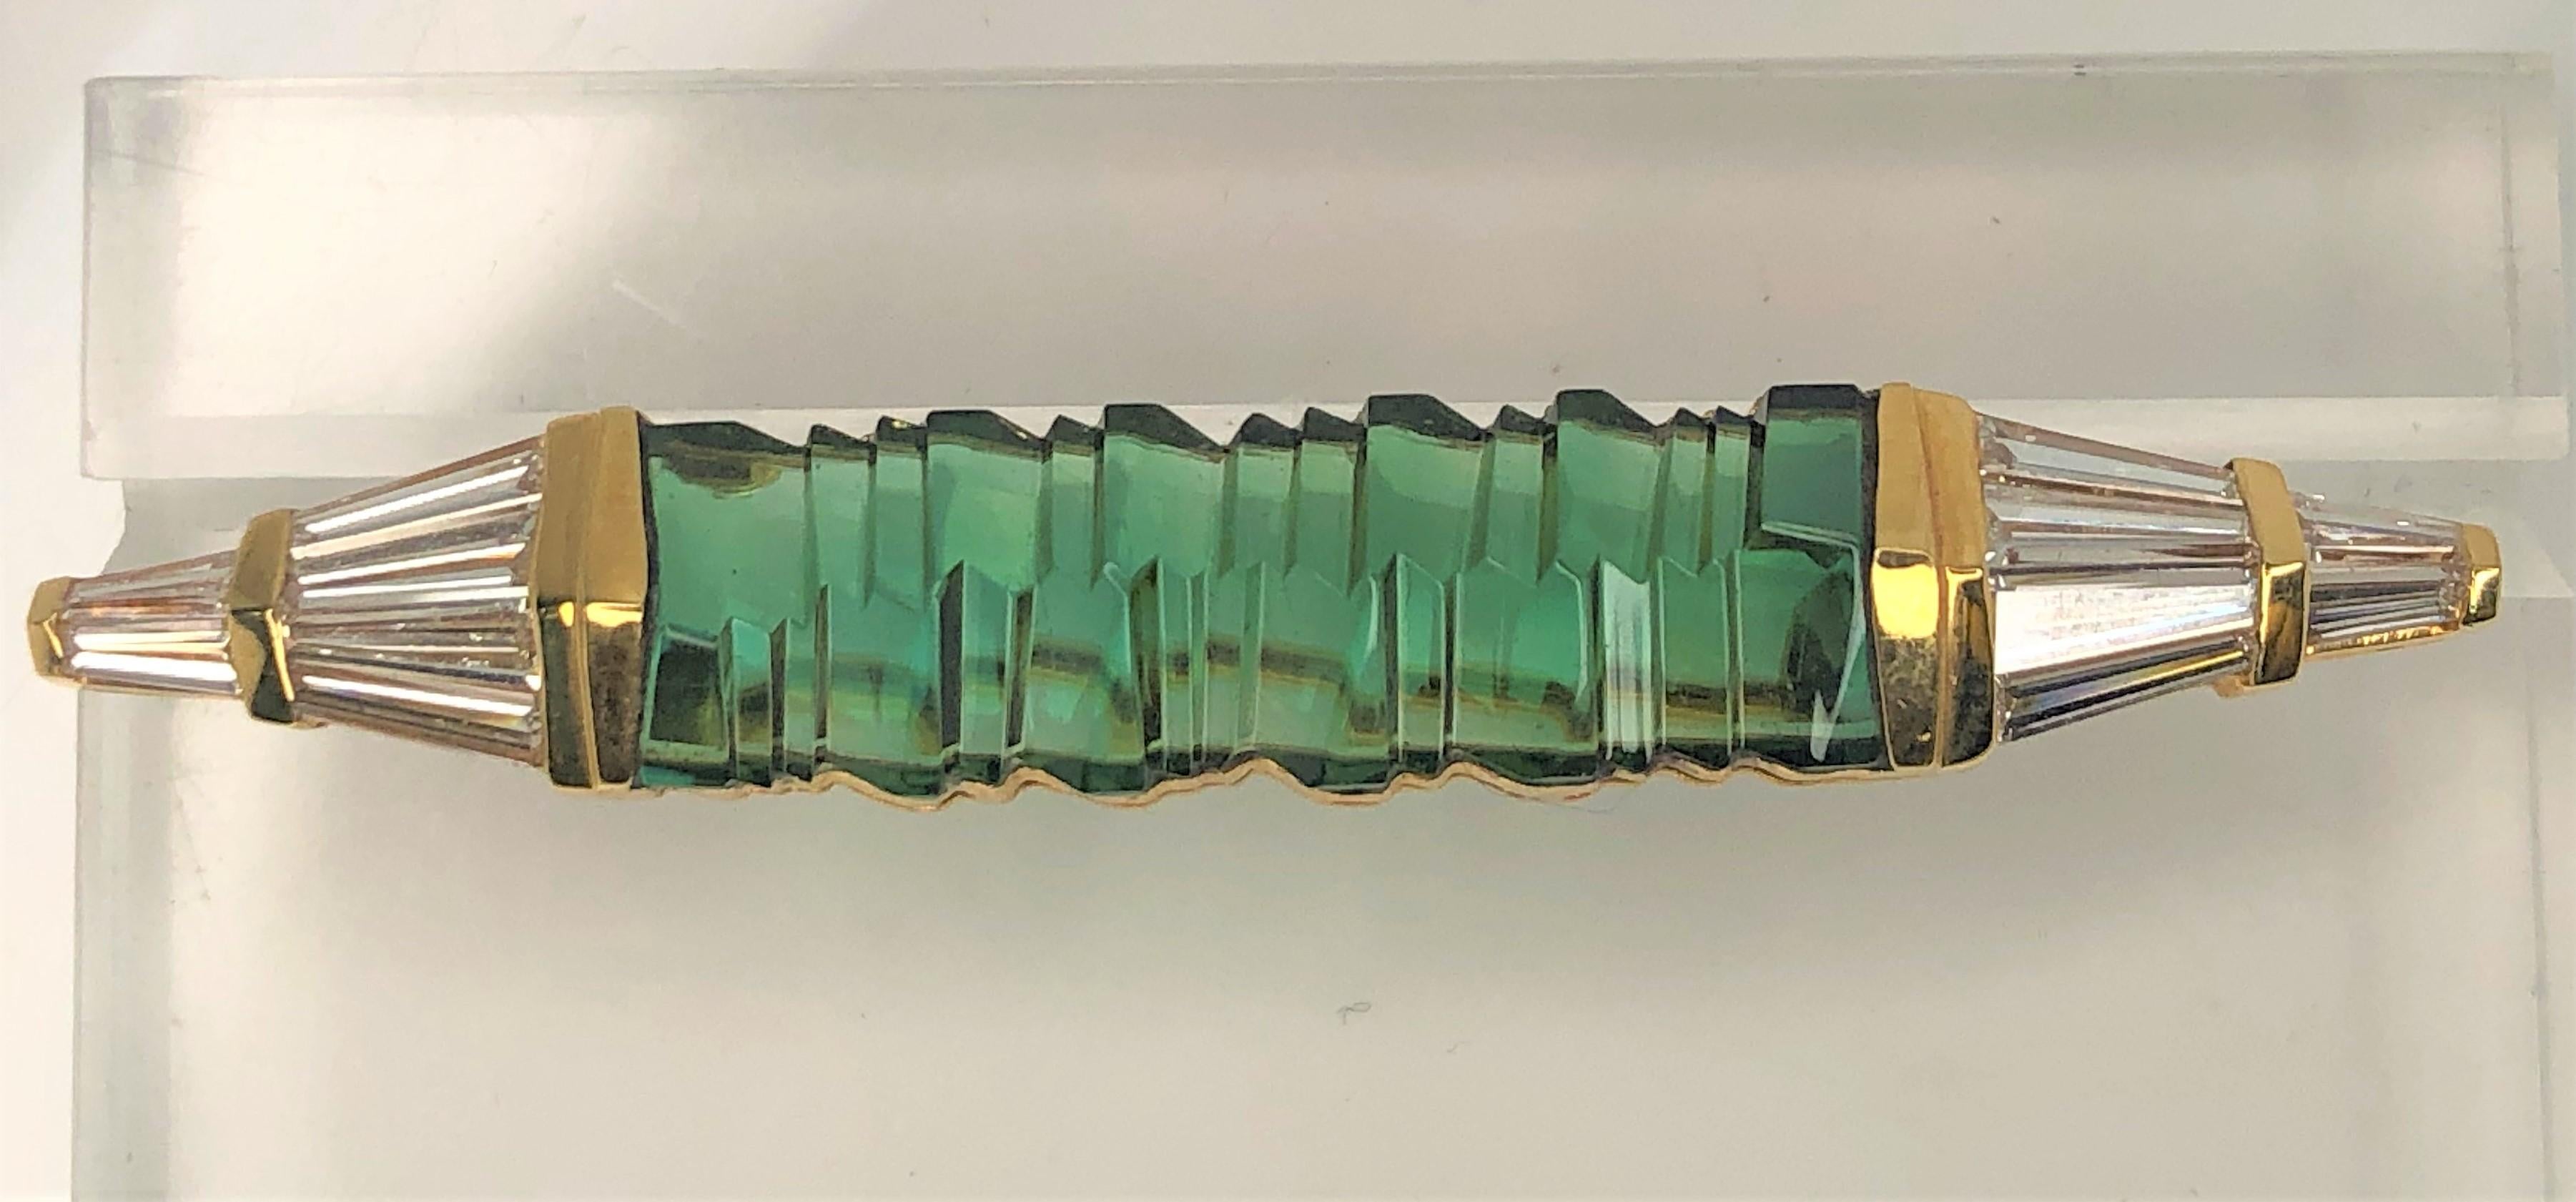 This is without question a one-of-kind special cut green tourmaline and diamond brooch.
Green tourmaline, approximately 28mm x 9mm, special cut in an 'accordion' design.
Pointed ends of mounting set with tapered baguettes.  Approximately 1.20 total